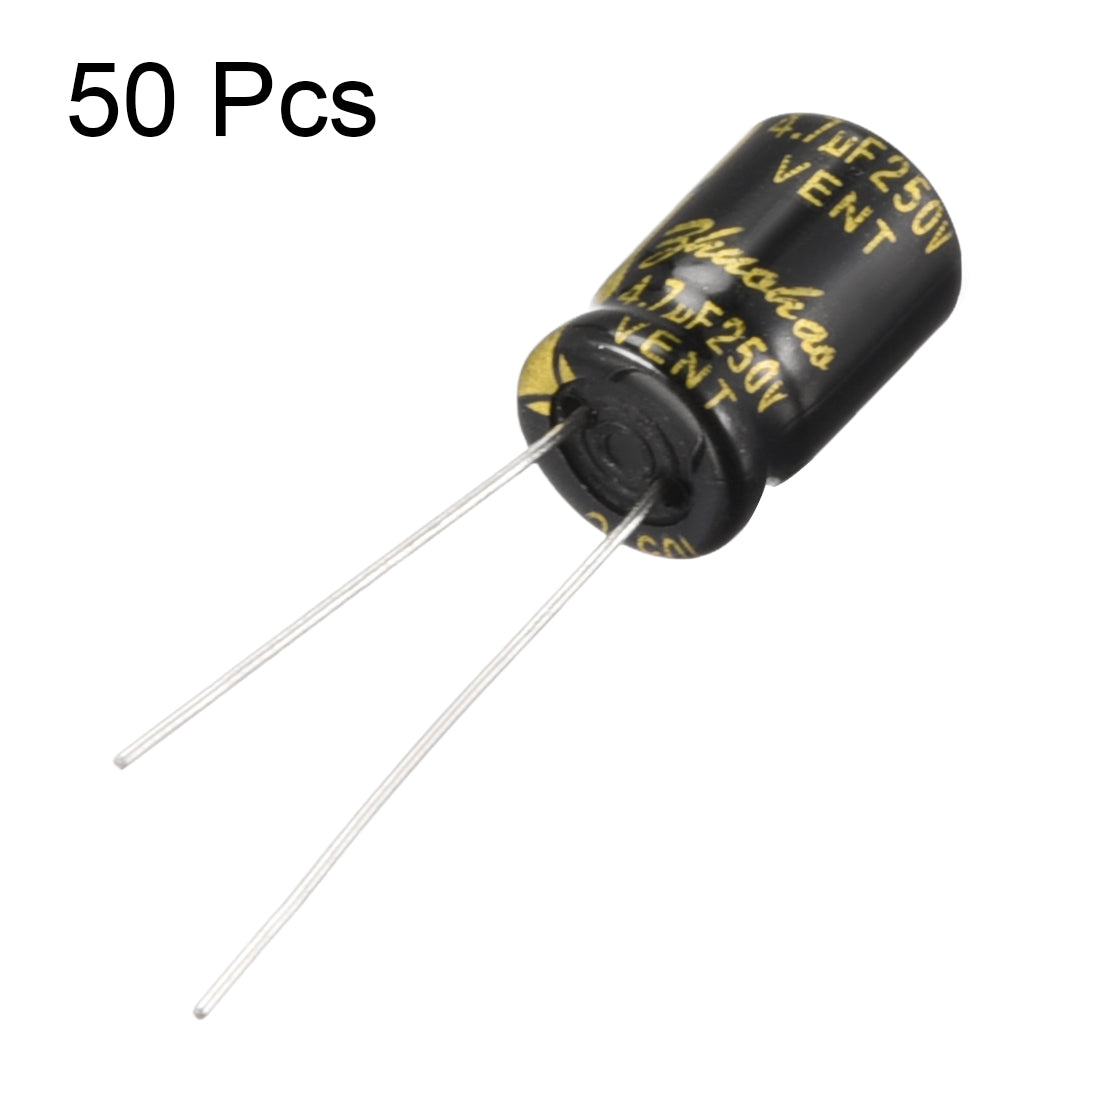 uxcell Uxcell Aluminum Radial Electrolytic Capacitor with 4.7uF 250V 105 Celsius Life 2000H 8 x 12 mm Black 50pcs